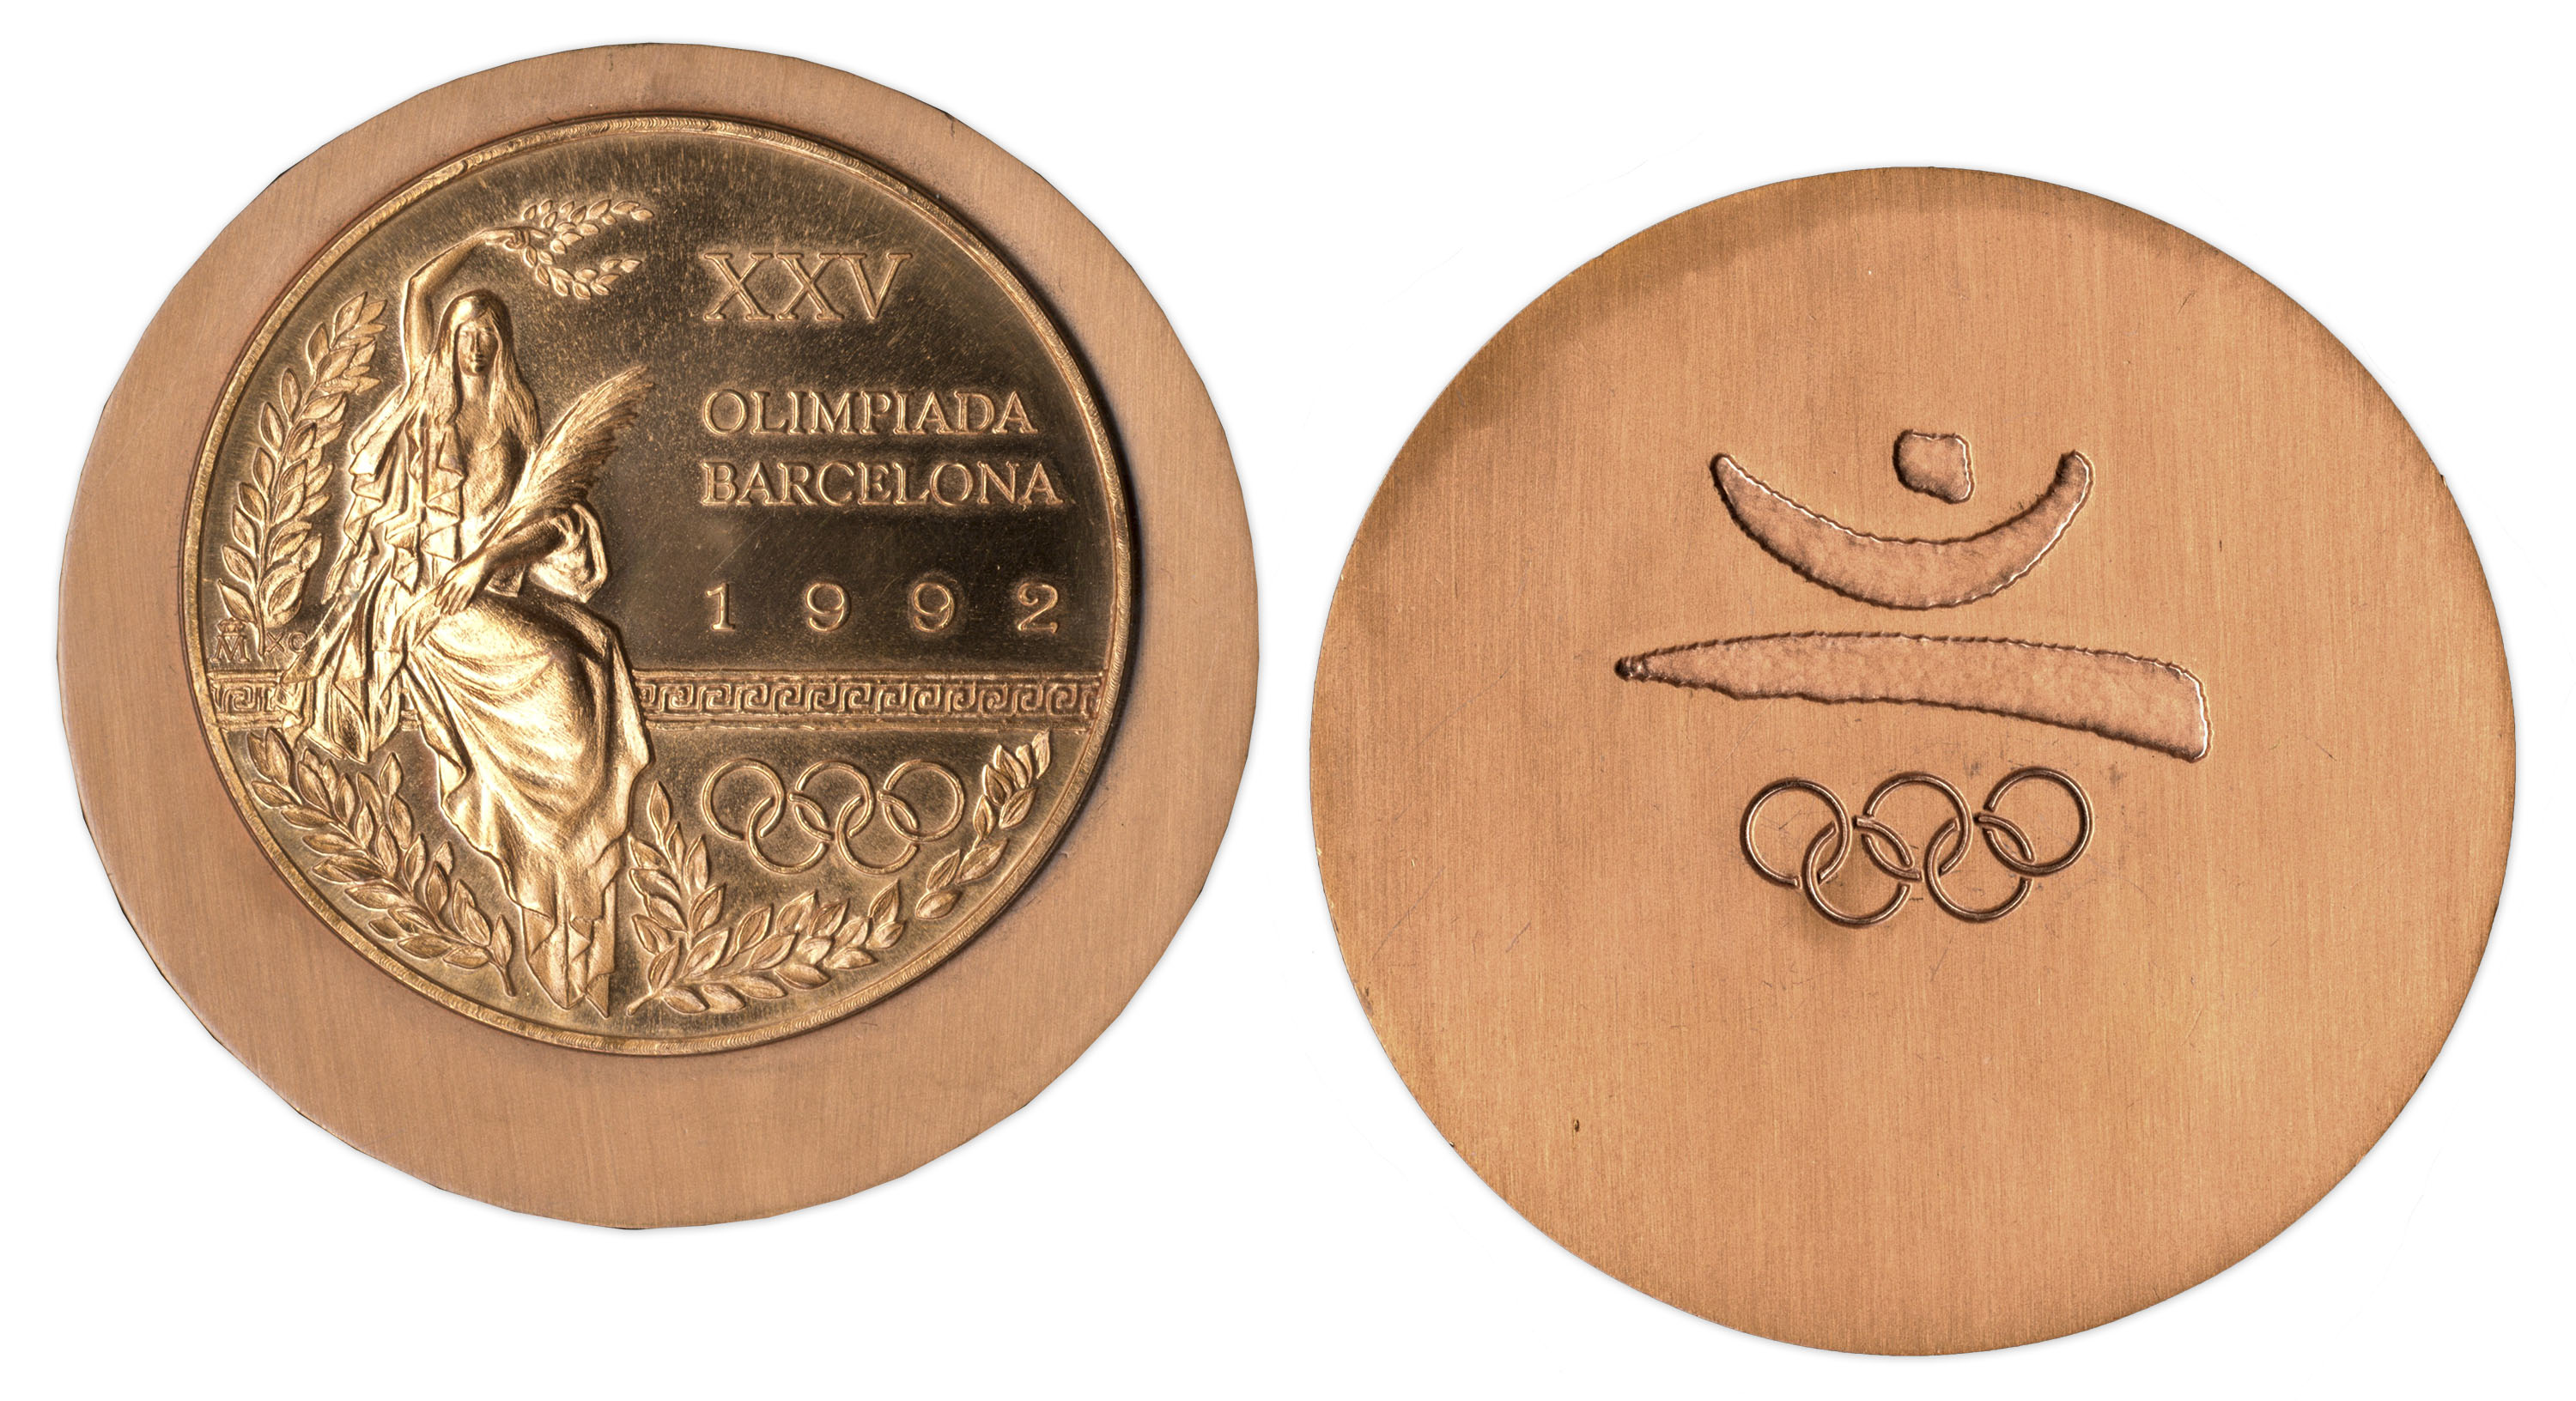 Sell a Bronze 1992 Barcelona Olympics Medal at Nate D ...